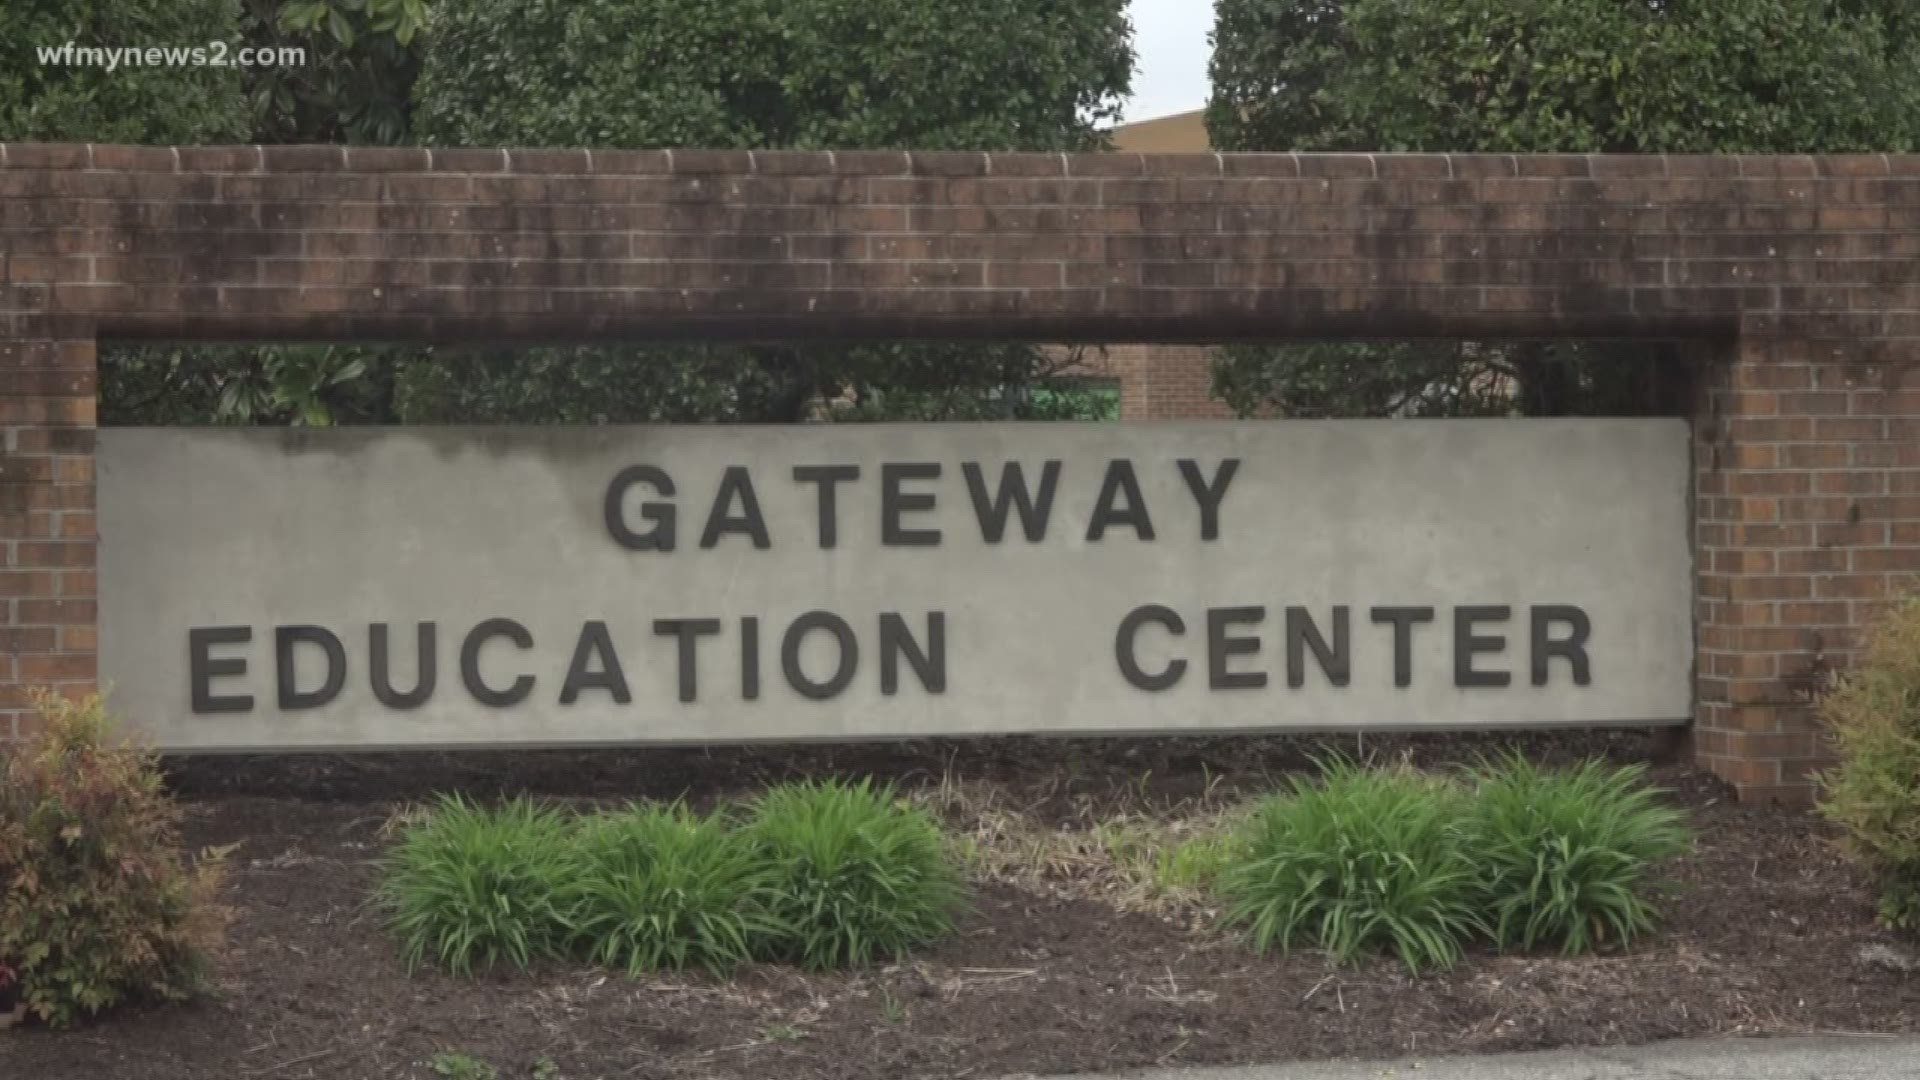 Many parents said received phone calls from staff on Friday telling them the School will shut down. As of now, Guilford County Schools has not made any decision.